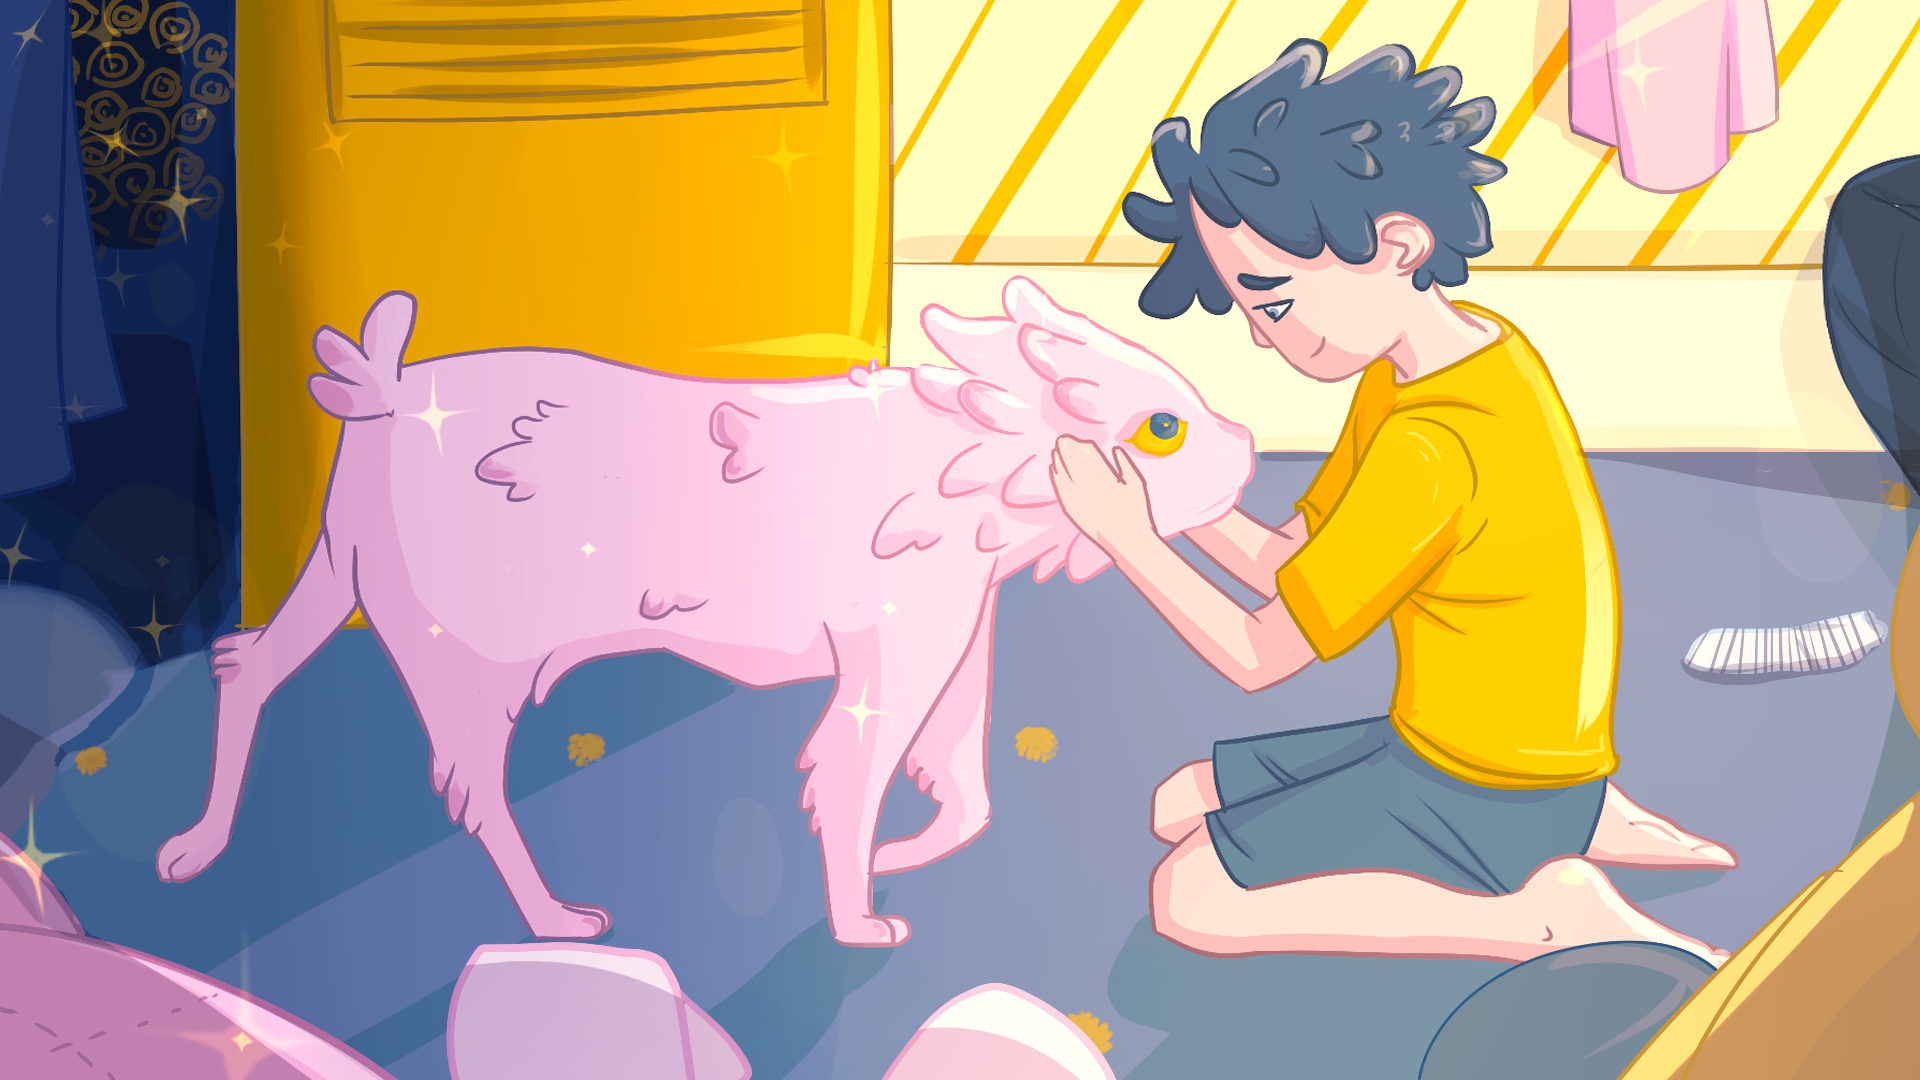 A small boy pets a magical creature in his room